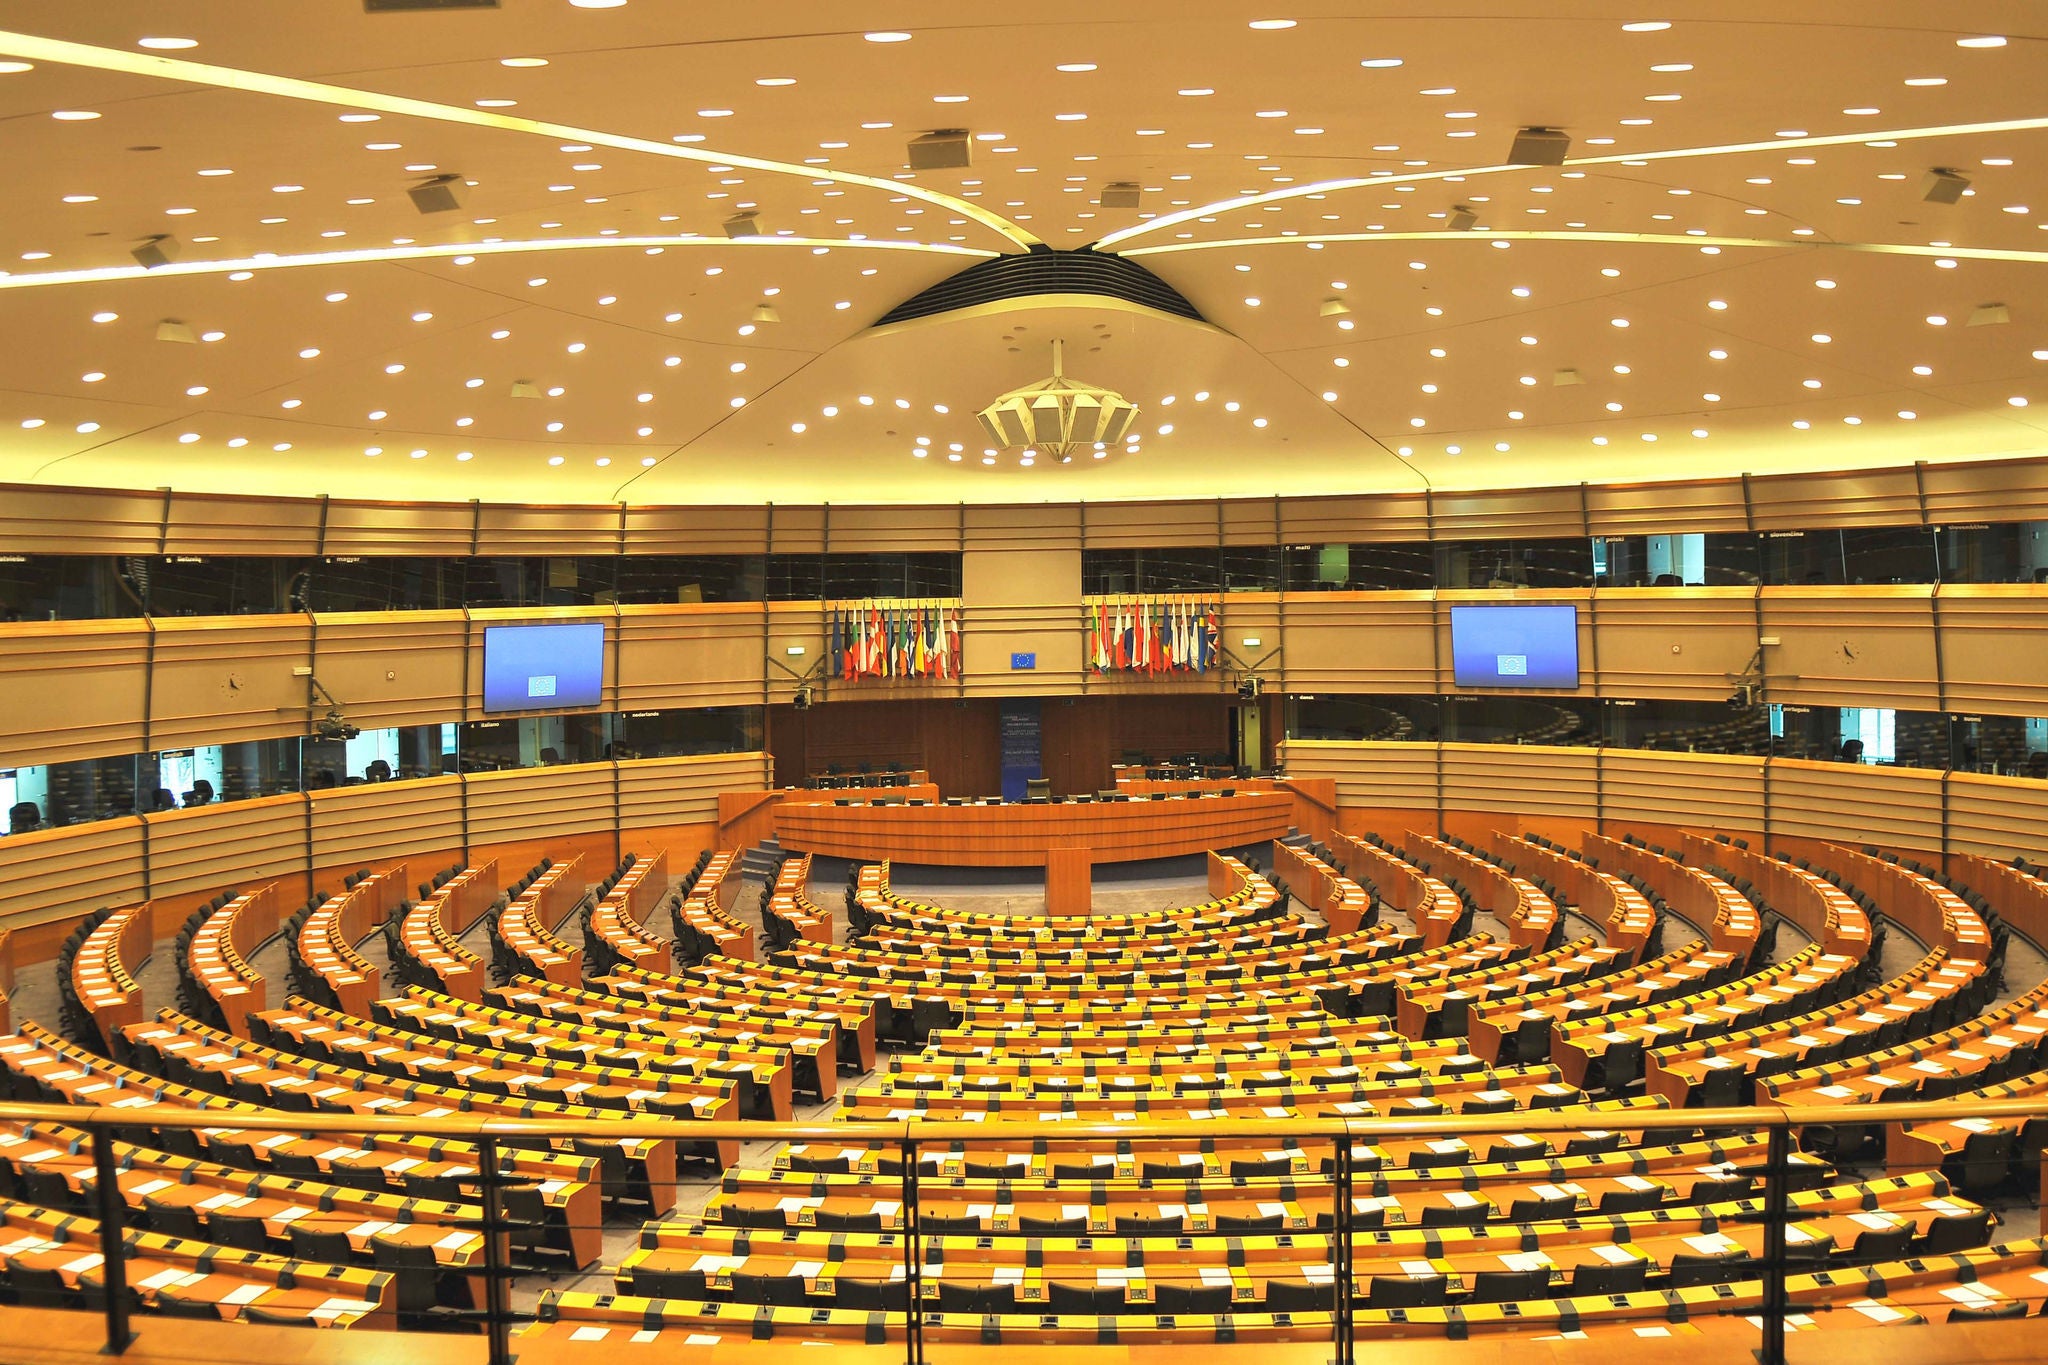 Empty big assembly room of European Parliament in Brussels, Belgium, Europe. Wooden chairs in semi-circle, papers on the banks, lots of boxes for translaiters, European flags and billboards in the background, many lights on the ceiling, fence in front. No people seen. Sandy brown color.